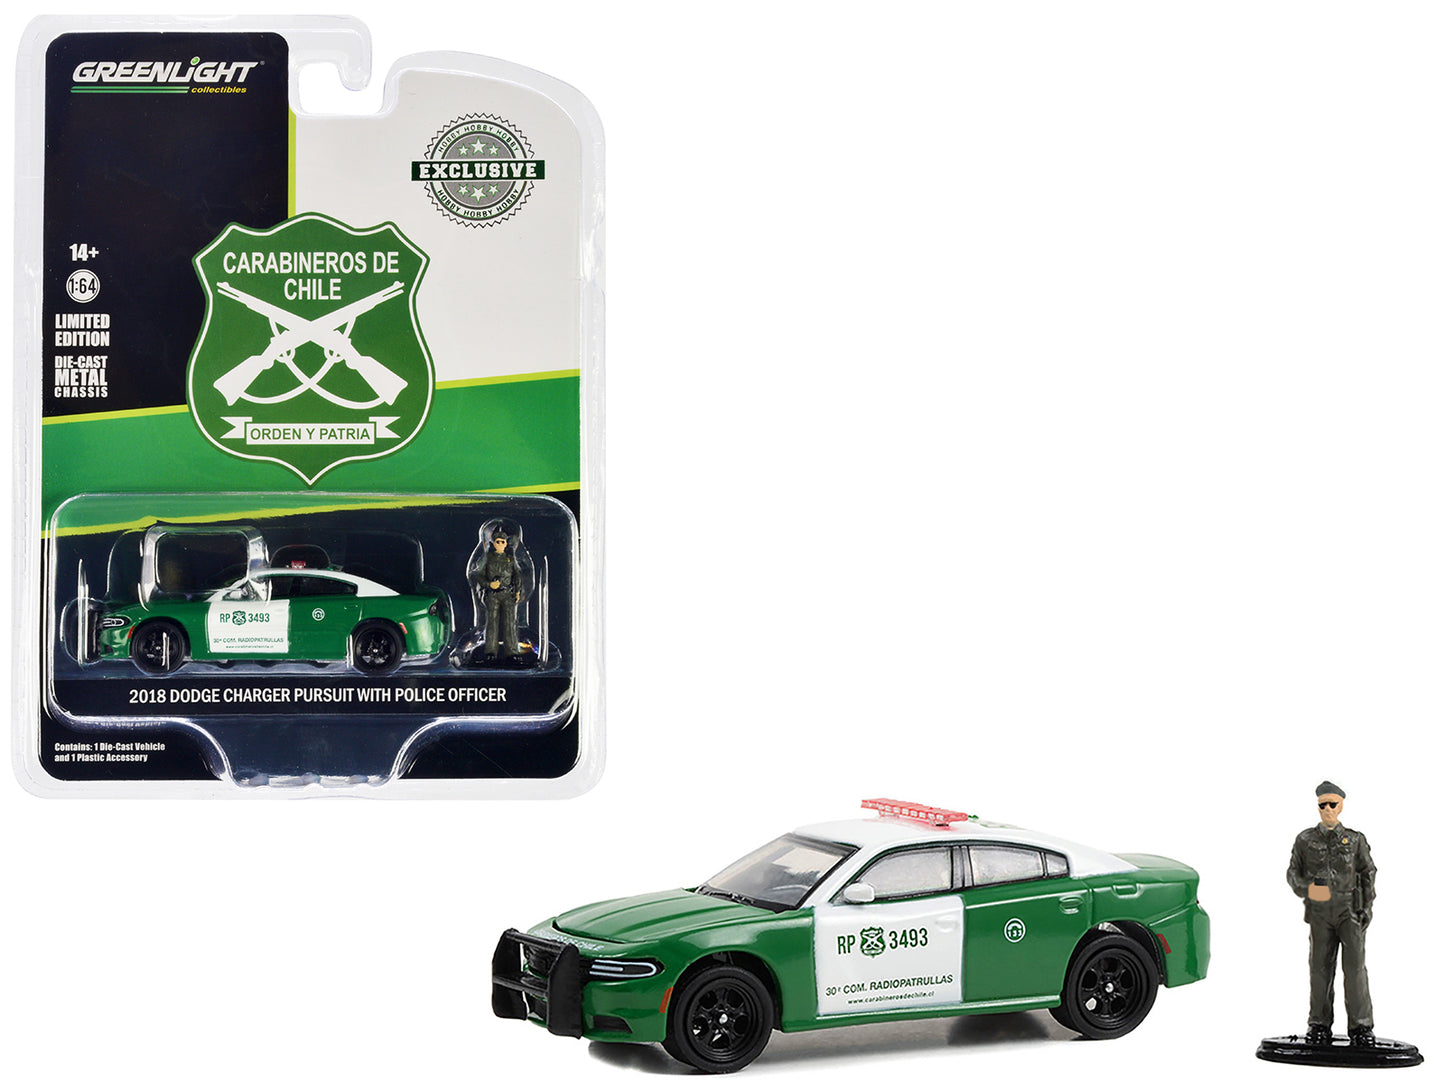 2018 Dodge Charger Pursuit Green and White "Carabineros de Chile" with Carabineros de Chile Police Figure "Hobby Exclusive" Series 1/64 Diecast Model Car by Greenlight